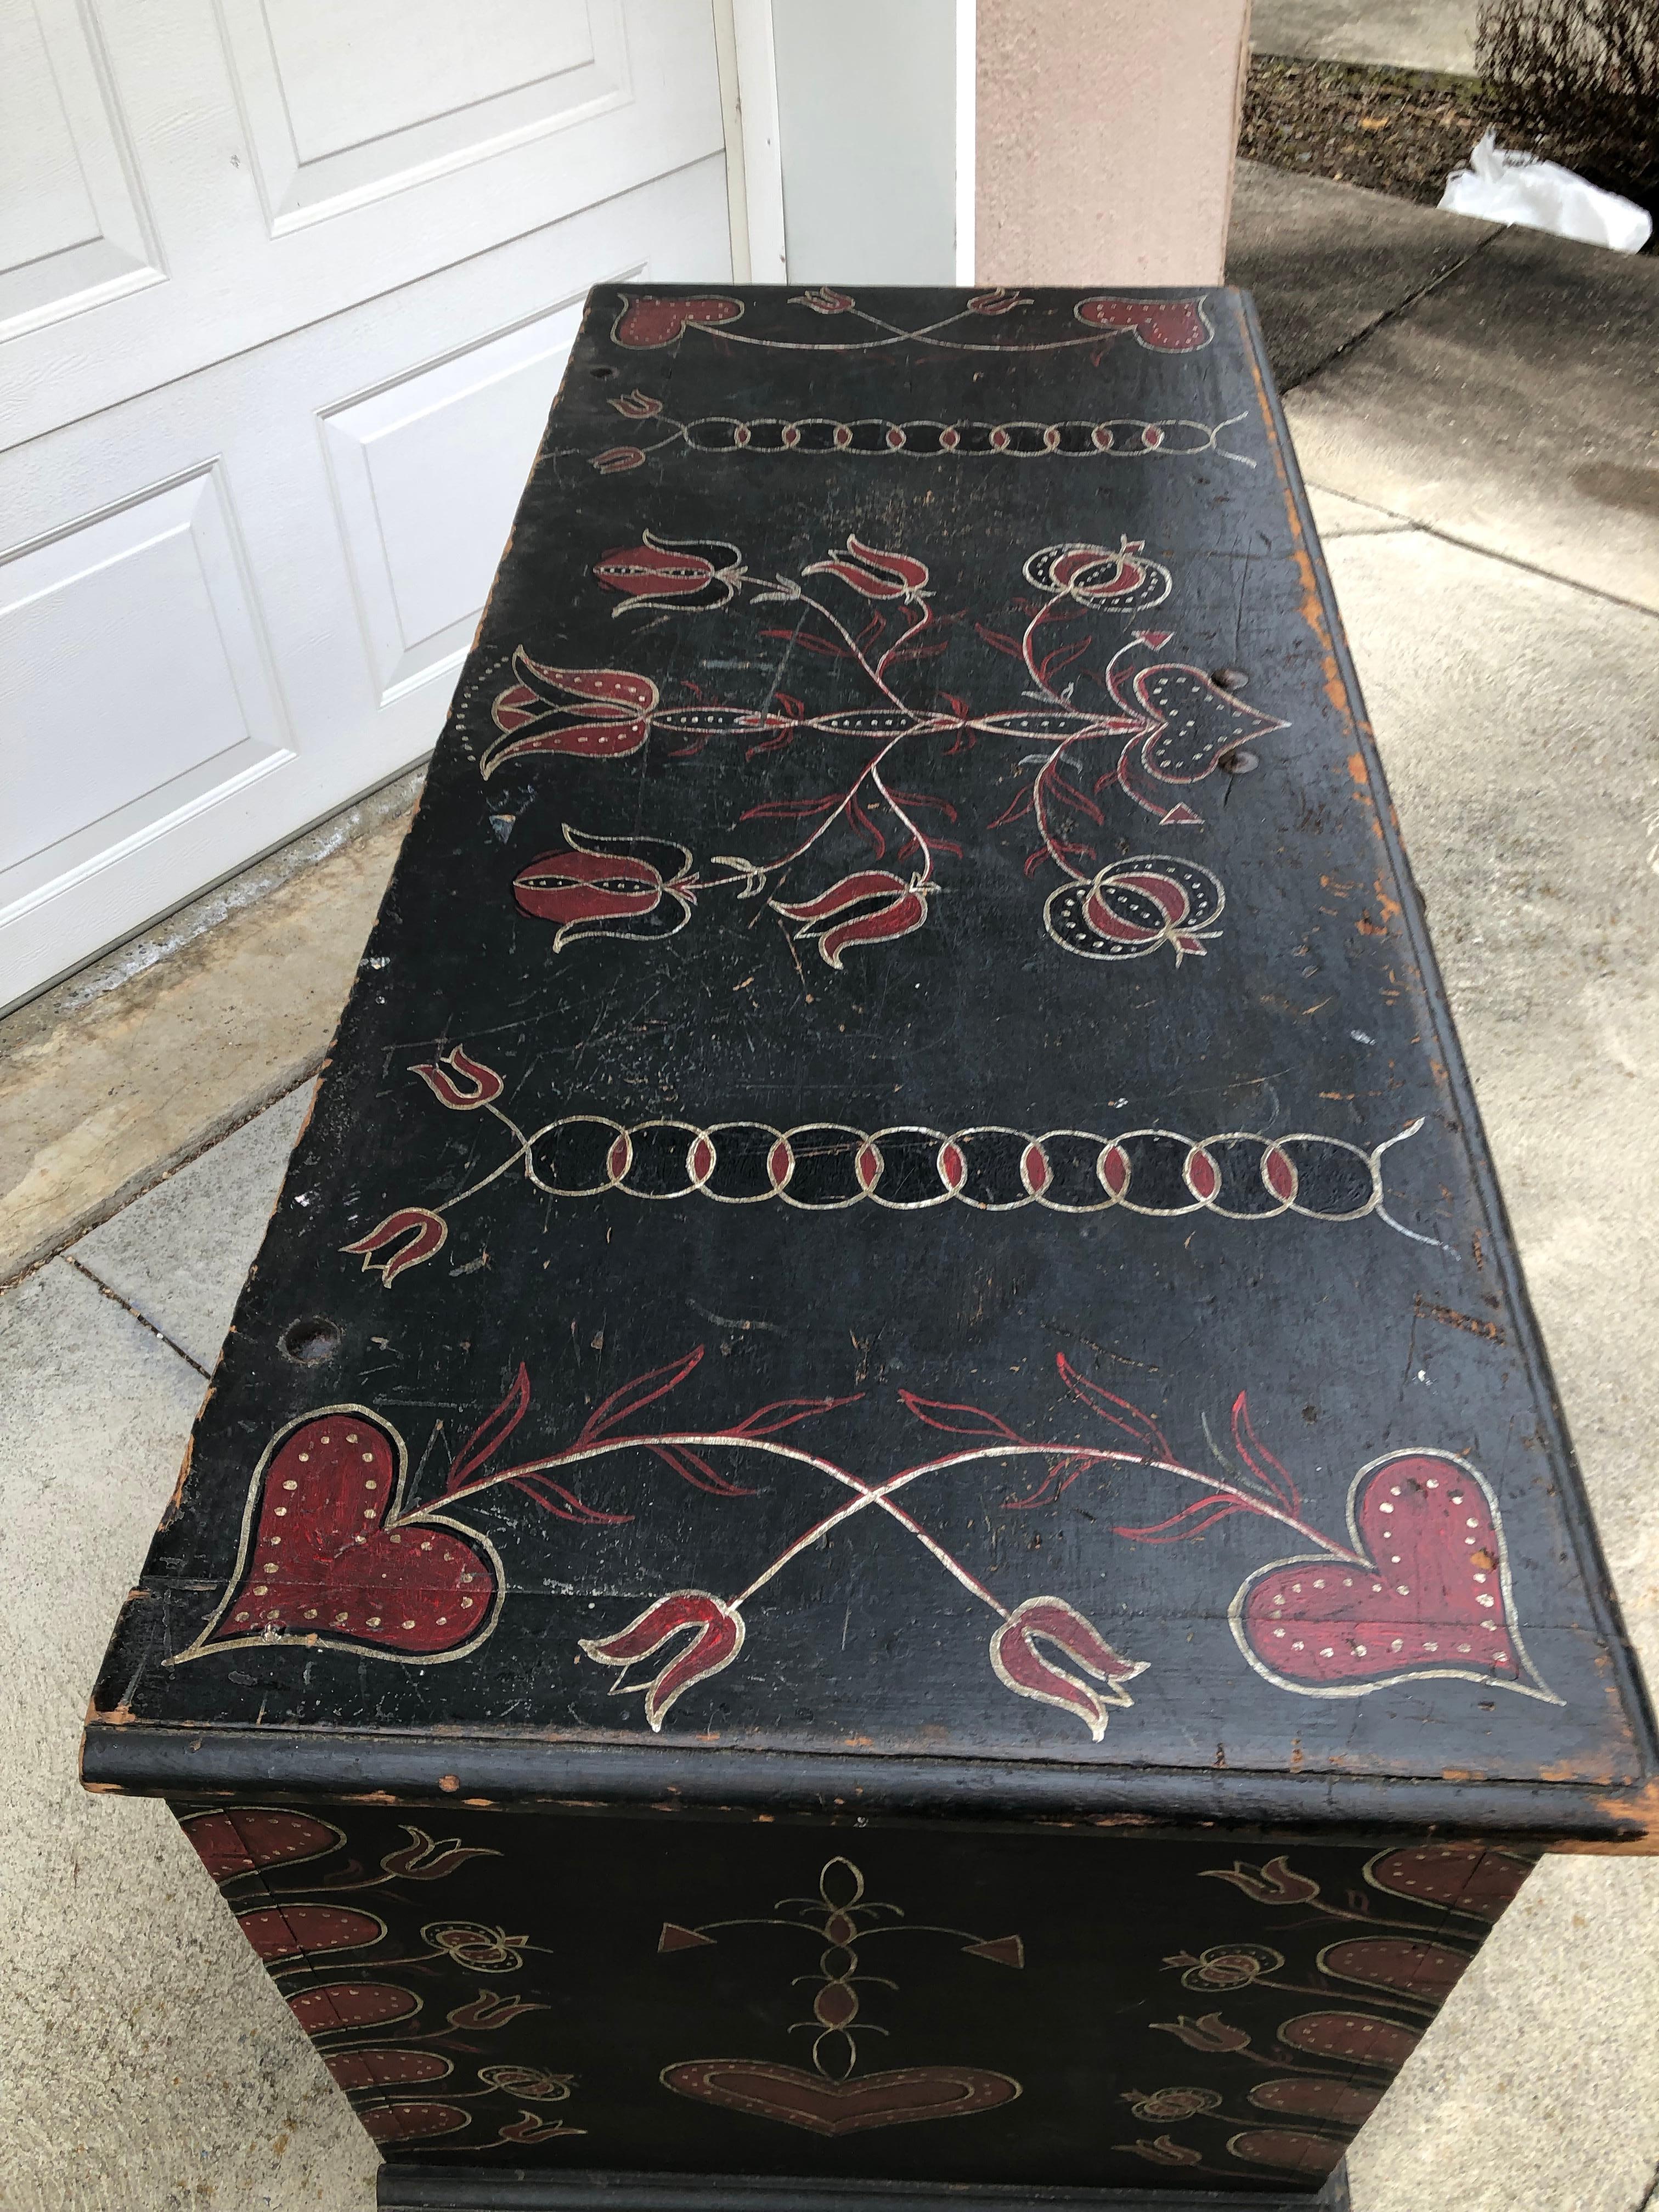 Hand-Painted Vibrant Painted Blanket Chest Lehigh County Pennsylvania, circa 1790 For Sale